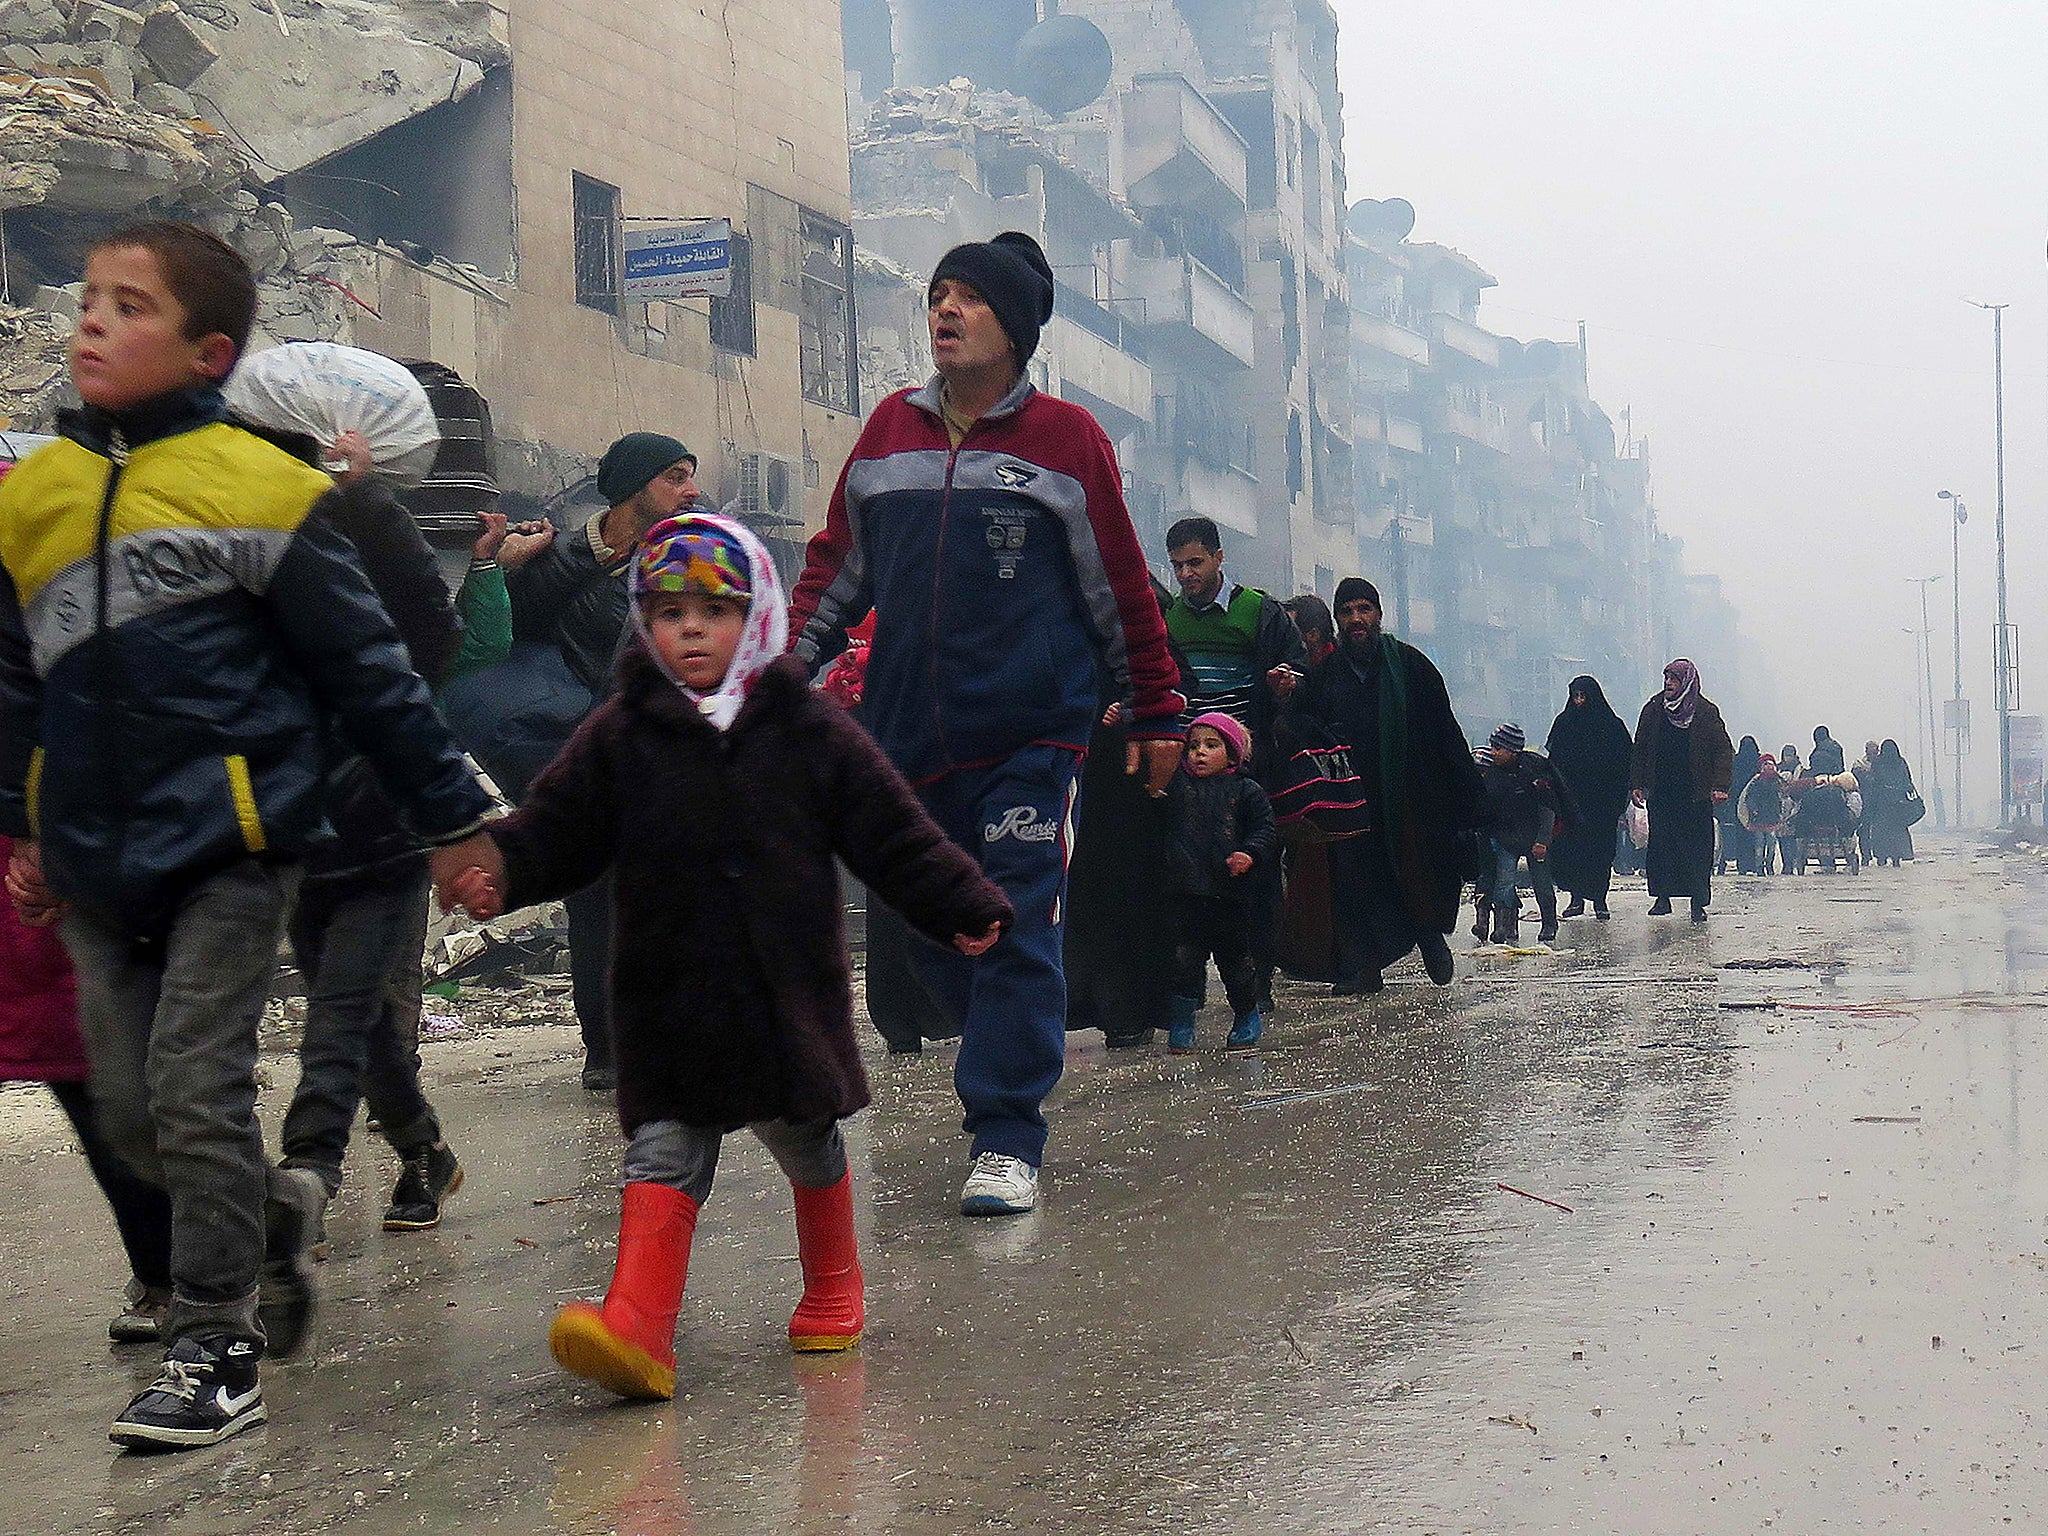 As many as 10 million people have been displaced by the ongoing conflict in Syria